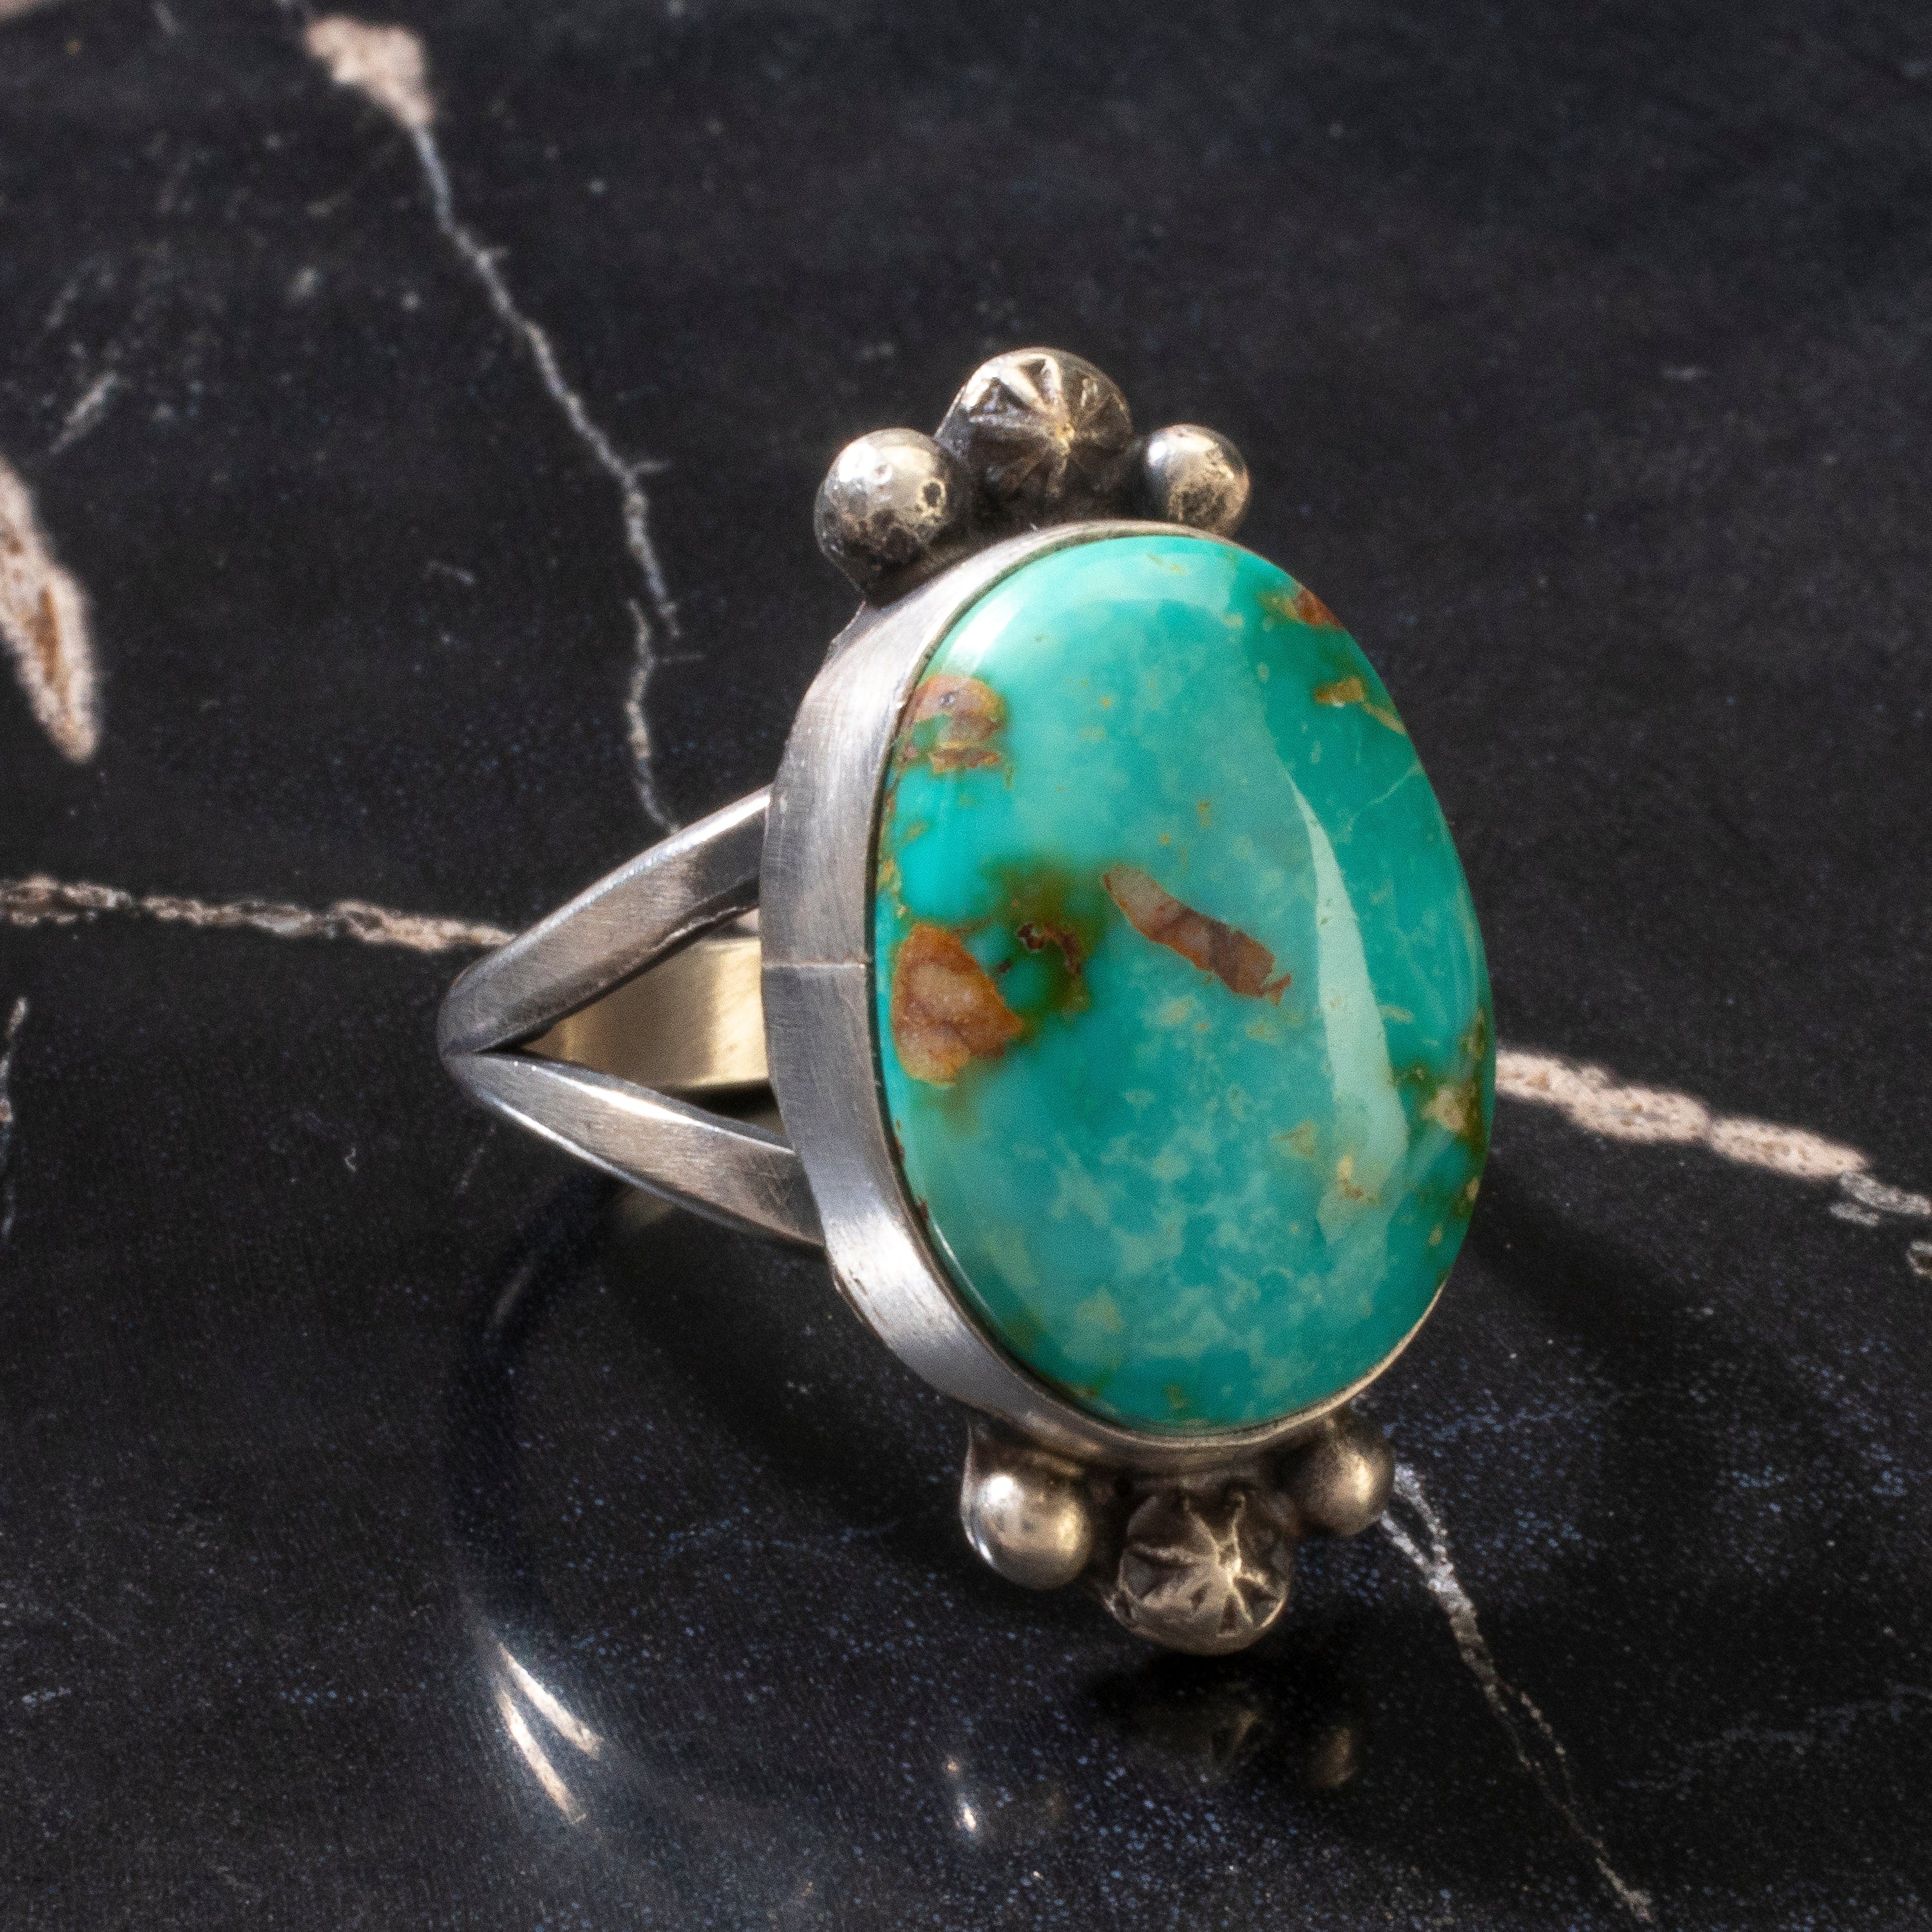 Kalifano Native American Jewelry 7 Scott Skeets Royston Turquoise Navajo USA Native American Made 925 Sterling Silver Ring NAR600.070.7